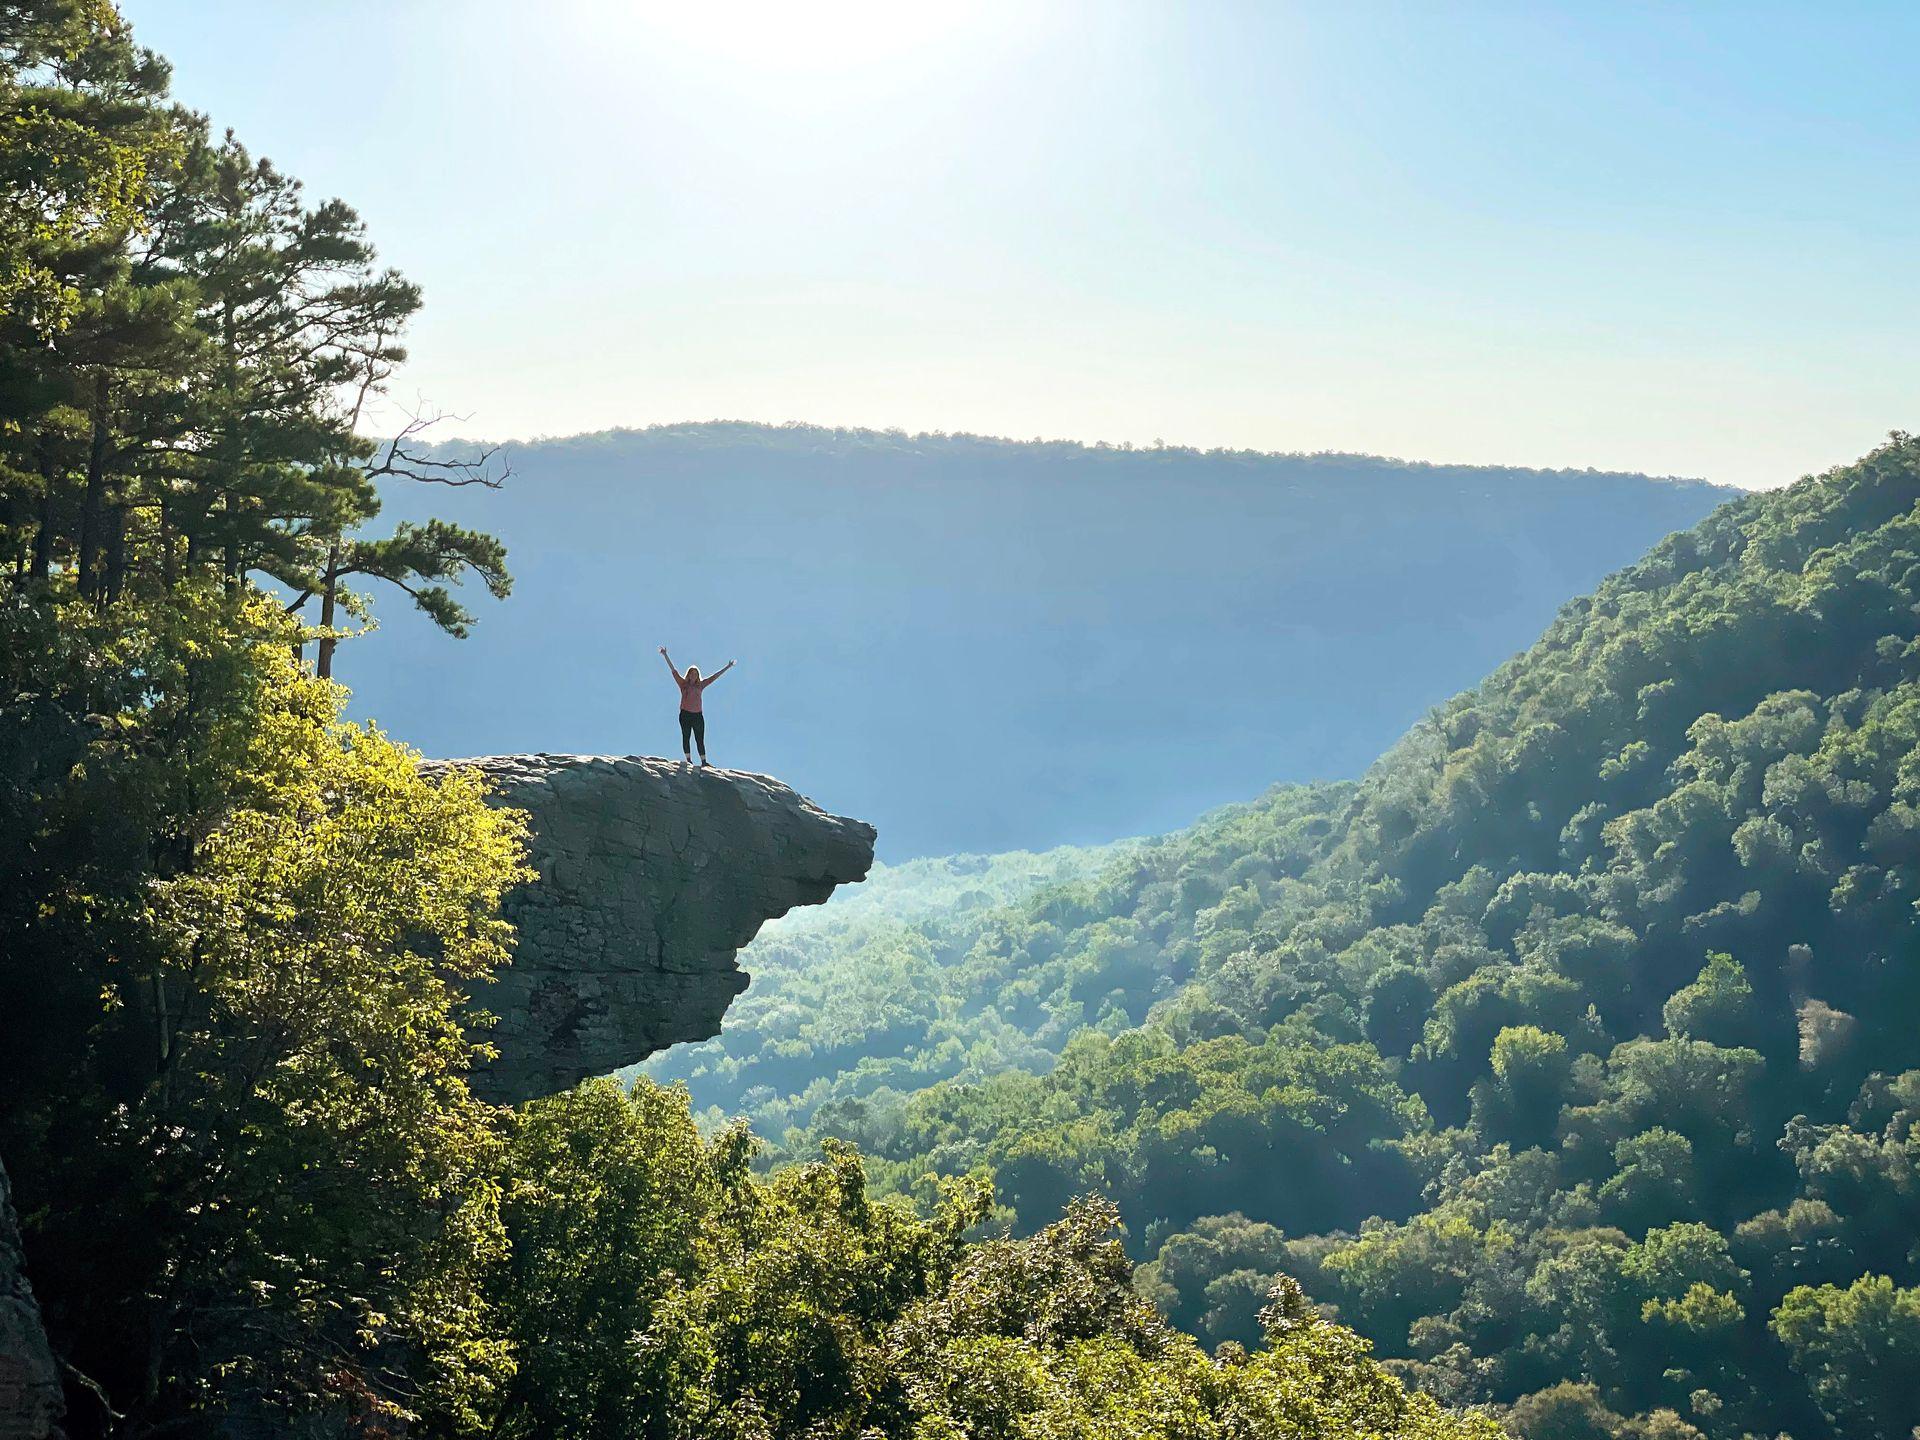 Lydia standing on the Whitaker Point Rock with a view of the valley behind her.